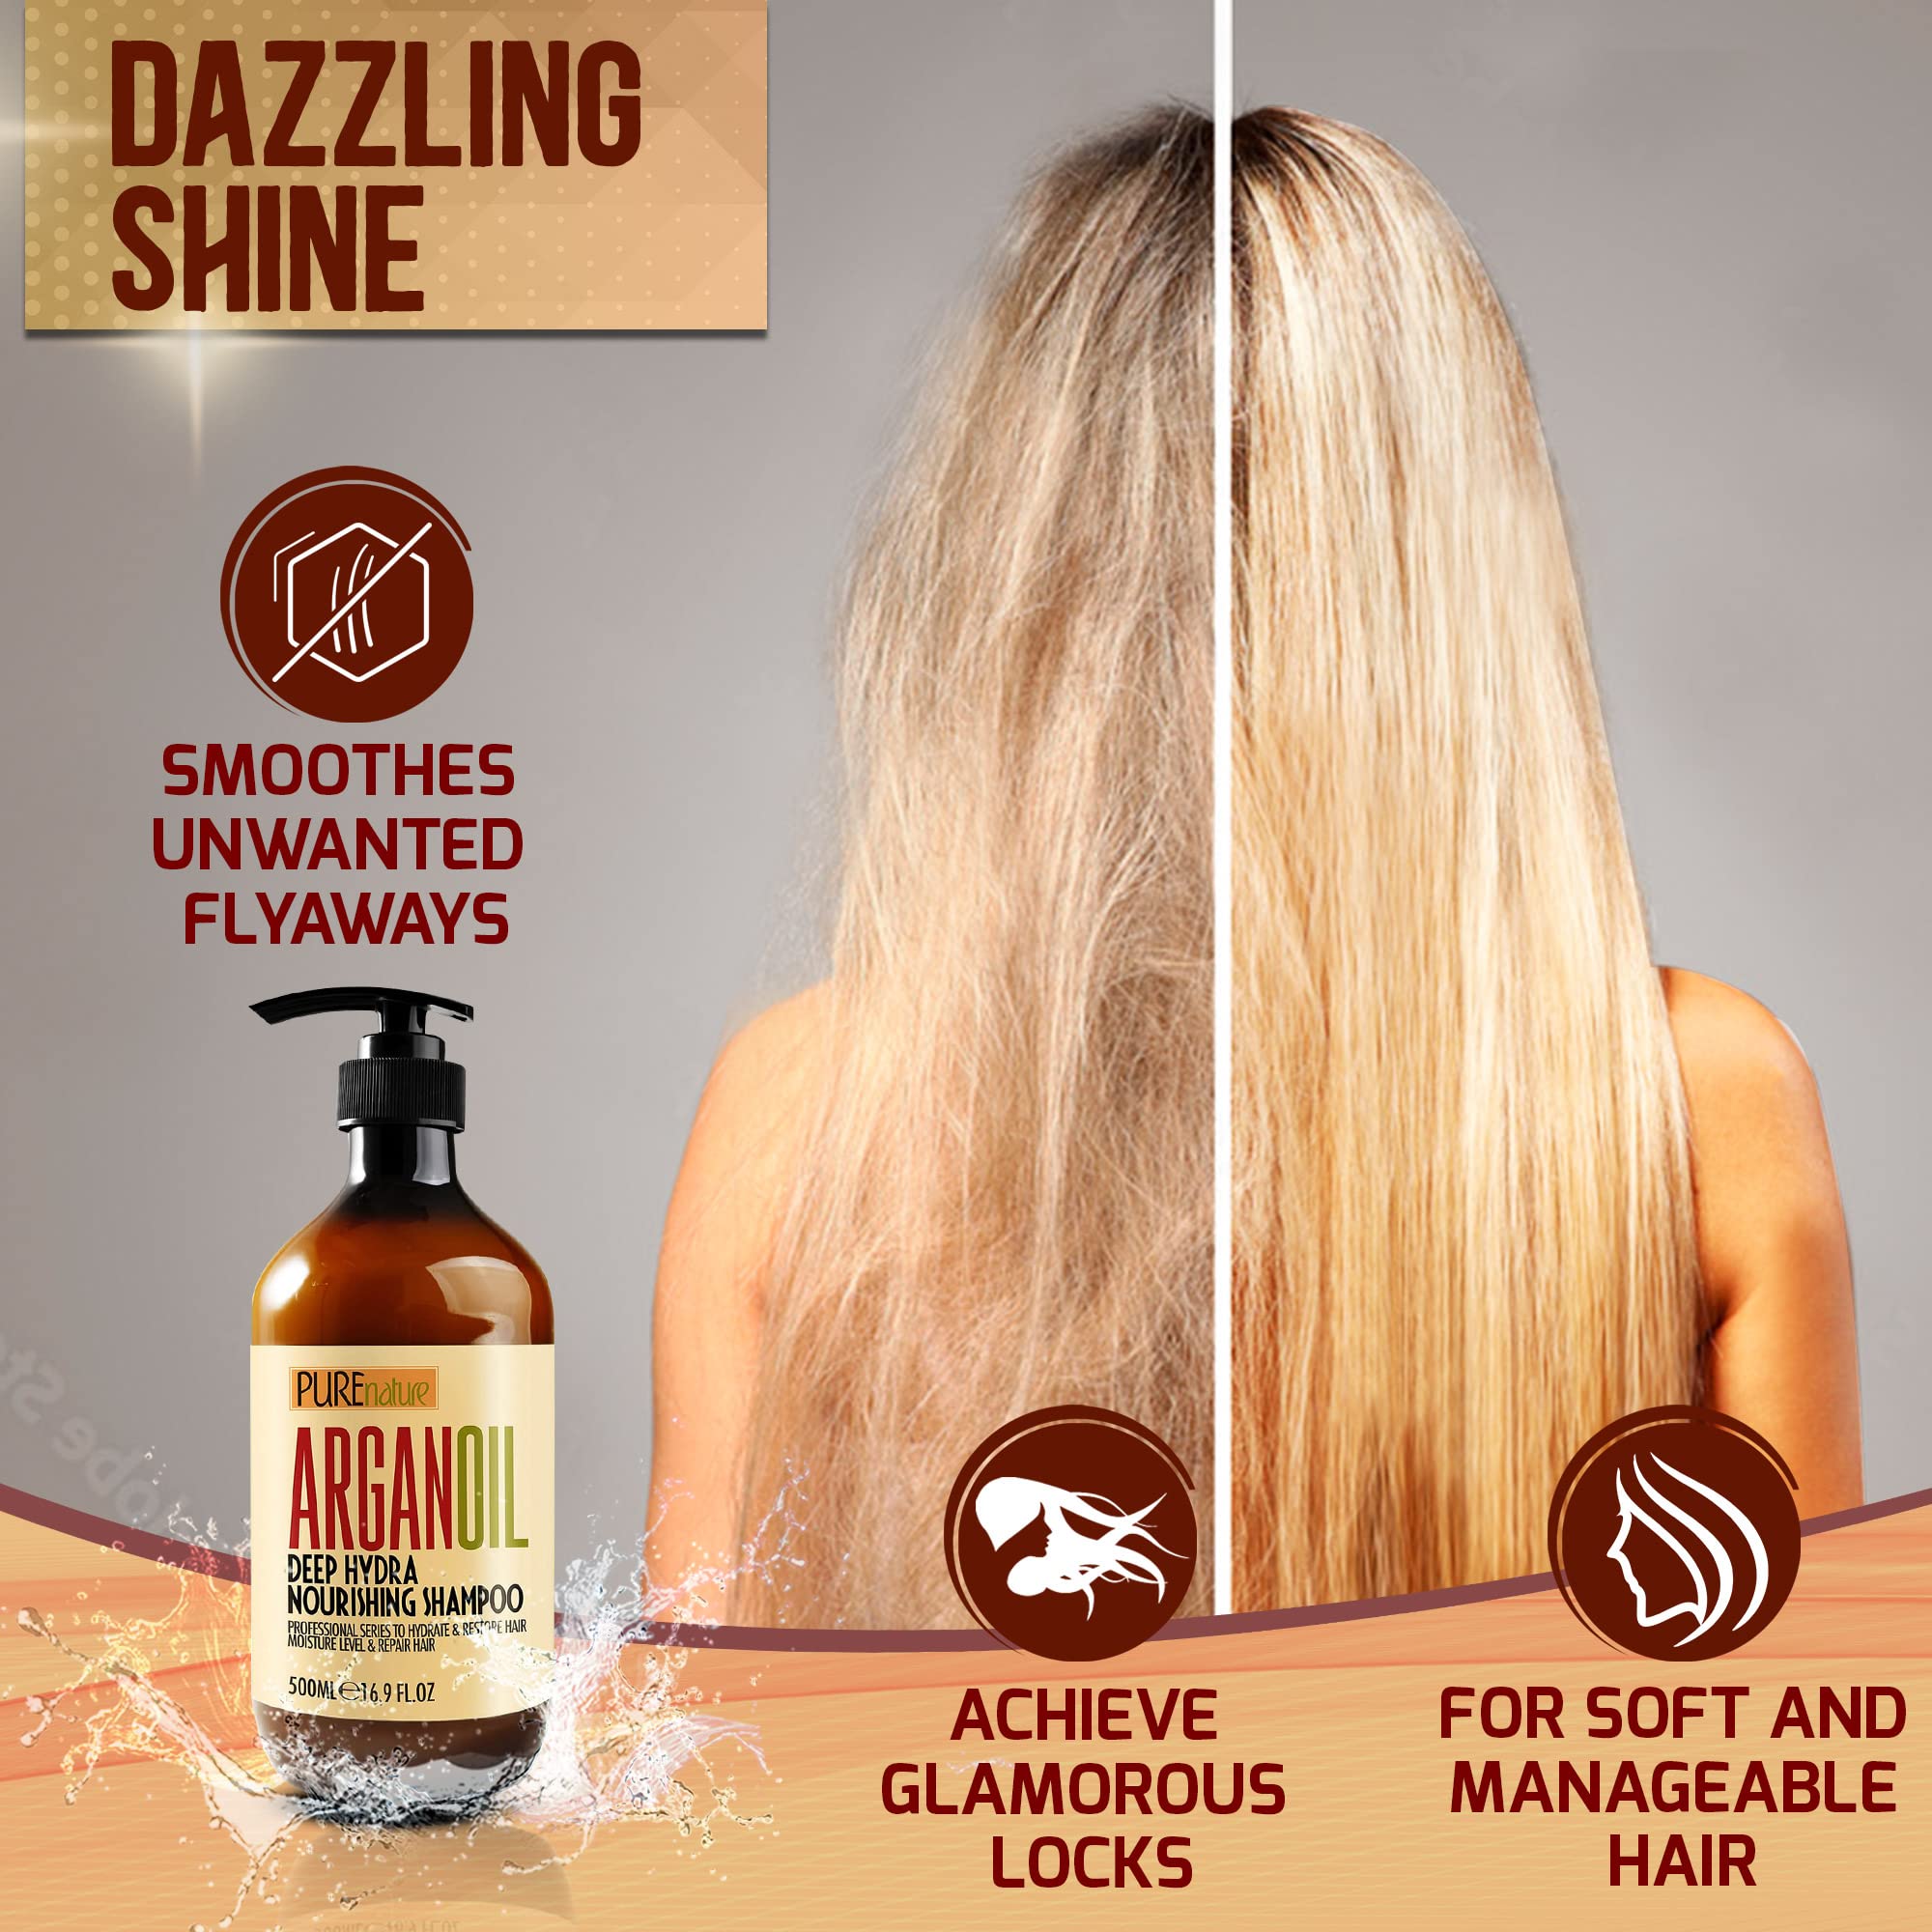 Moroccan Argan Oil Shampoo - Sulfate SLS Paraben Free Moisturizing Treatment for Women and Men - For All Types Including Curly, Dry, Damaged and Oily Hair - Hydrating and Nourishing - Salon Grade